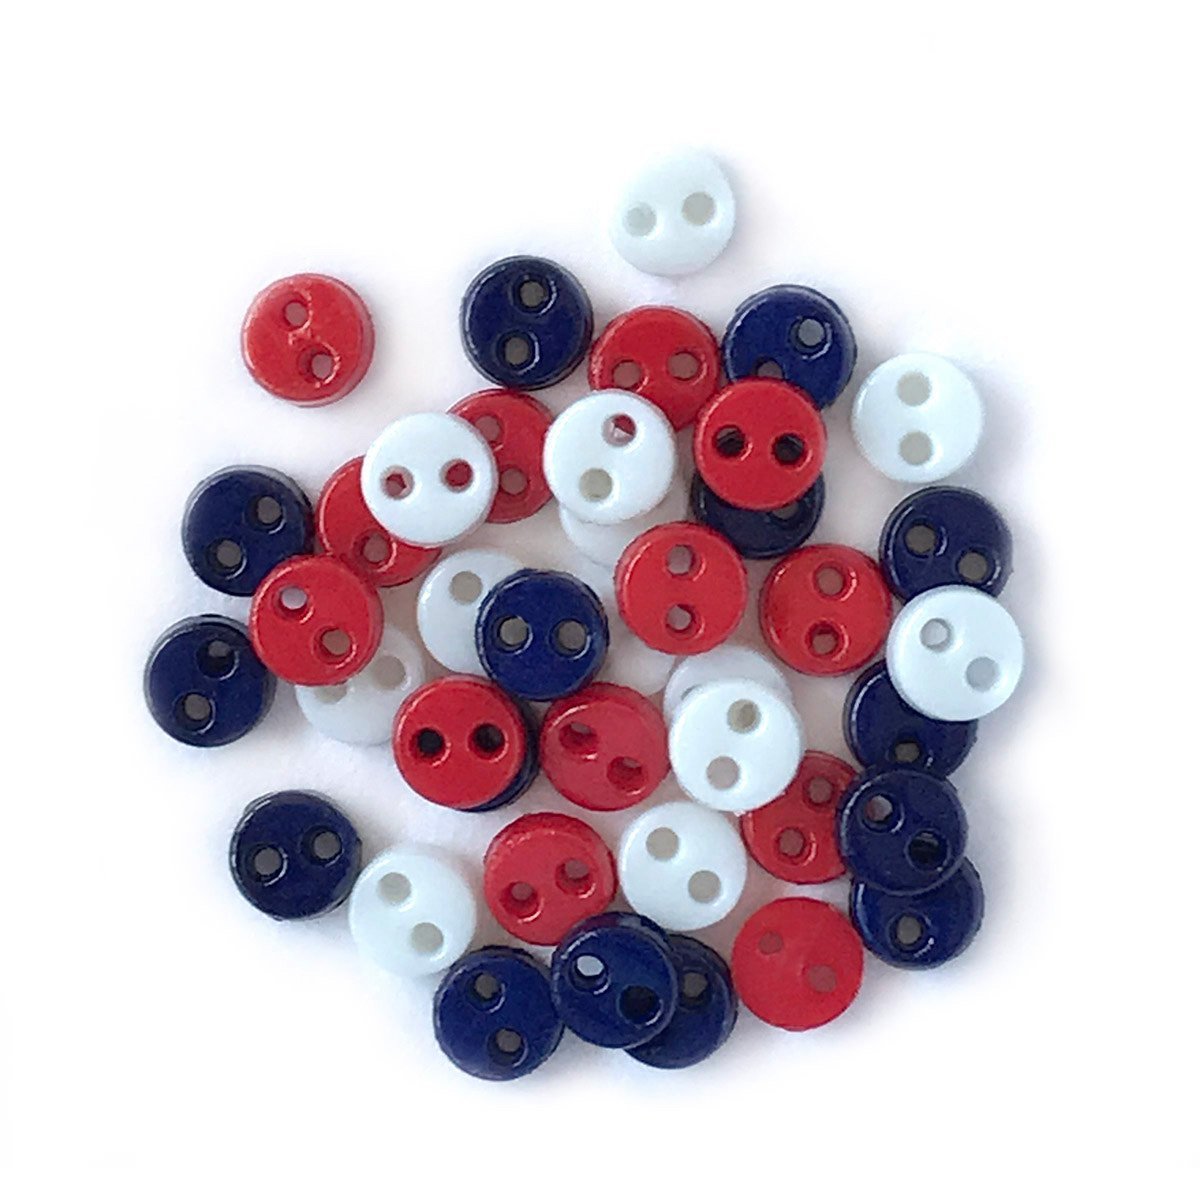 B194 Cute 8mm Paws Shank Buttons Micro Mini Buttons Tiny Buttons